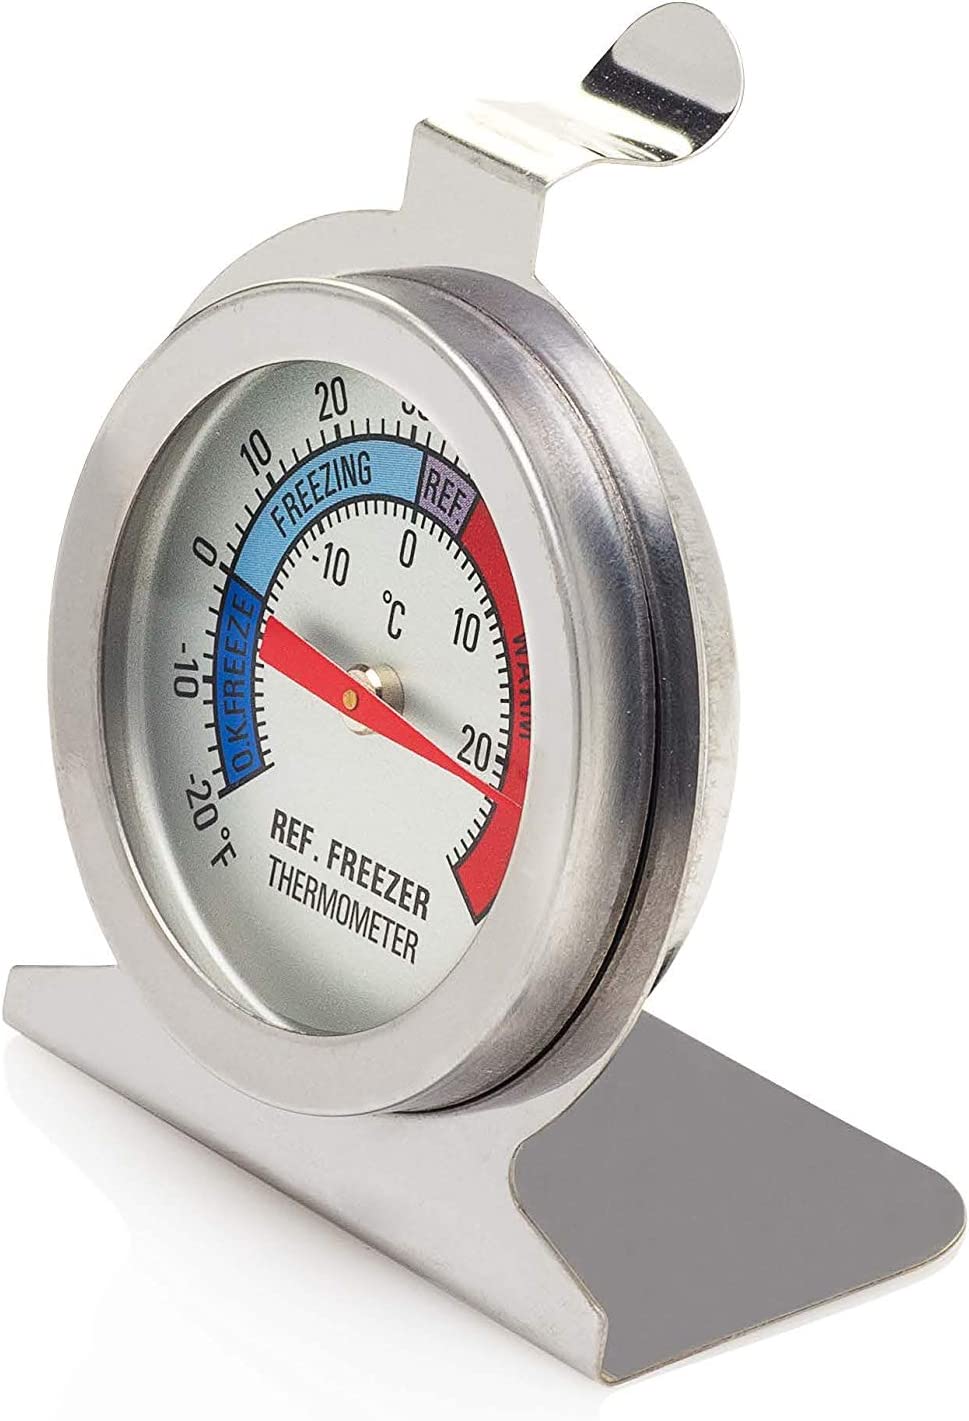 Smart Choice Oven Thermometer -100 to 600 Degrees with Easy Read Dial, Gray